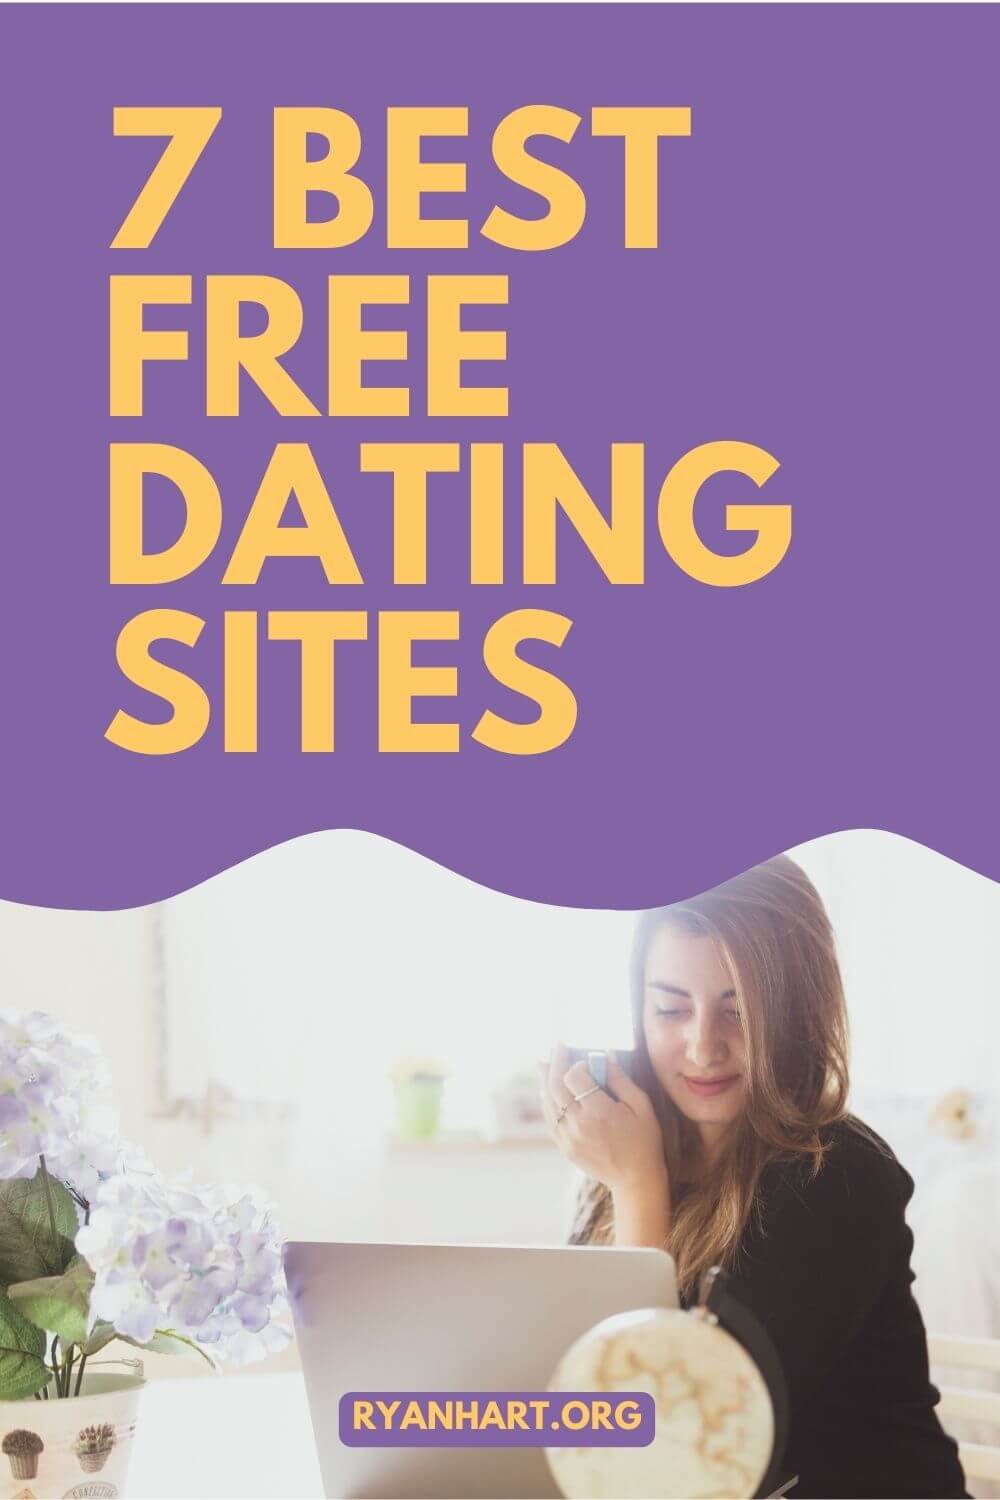 Woman using dating site